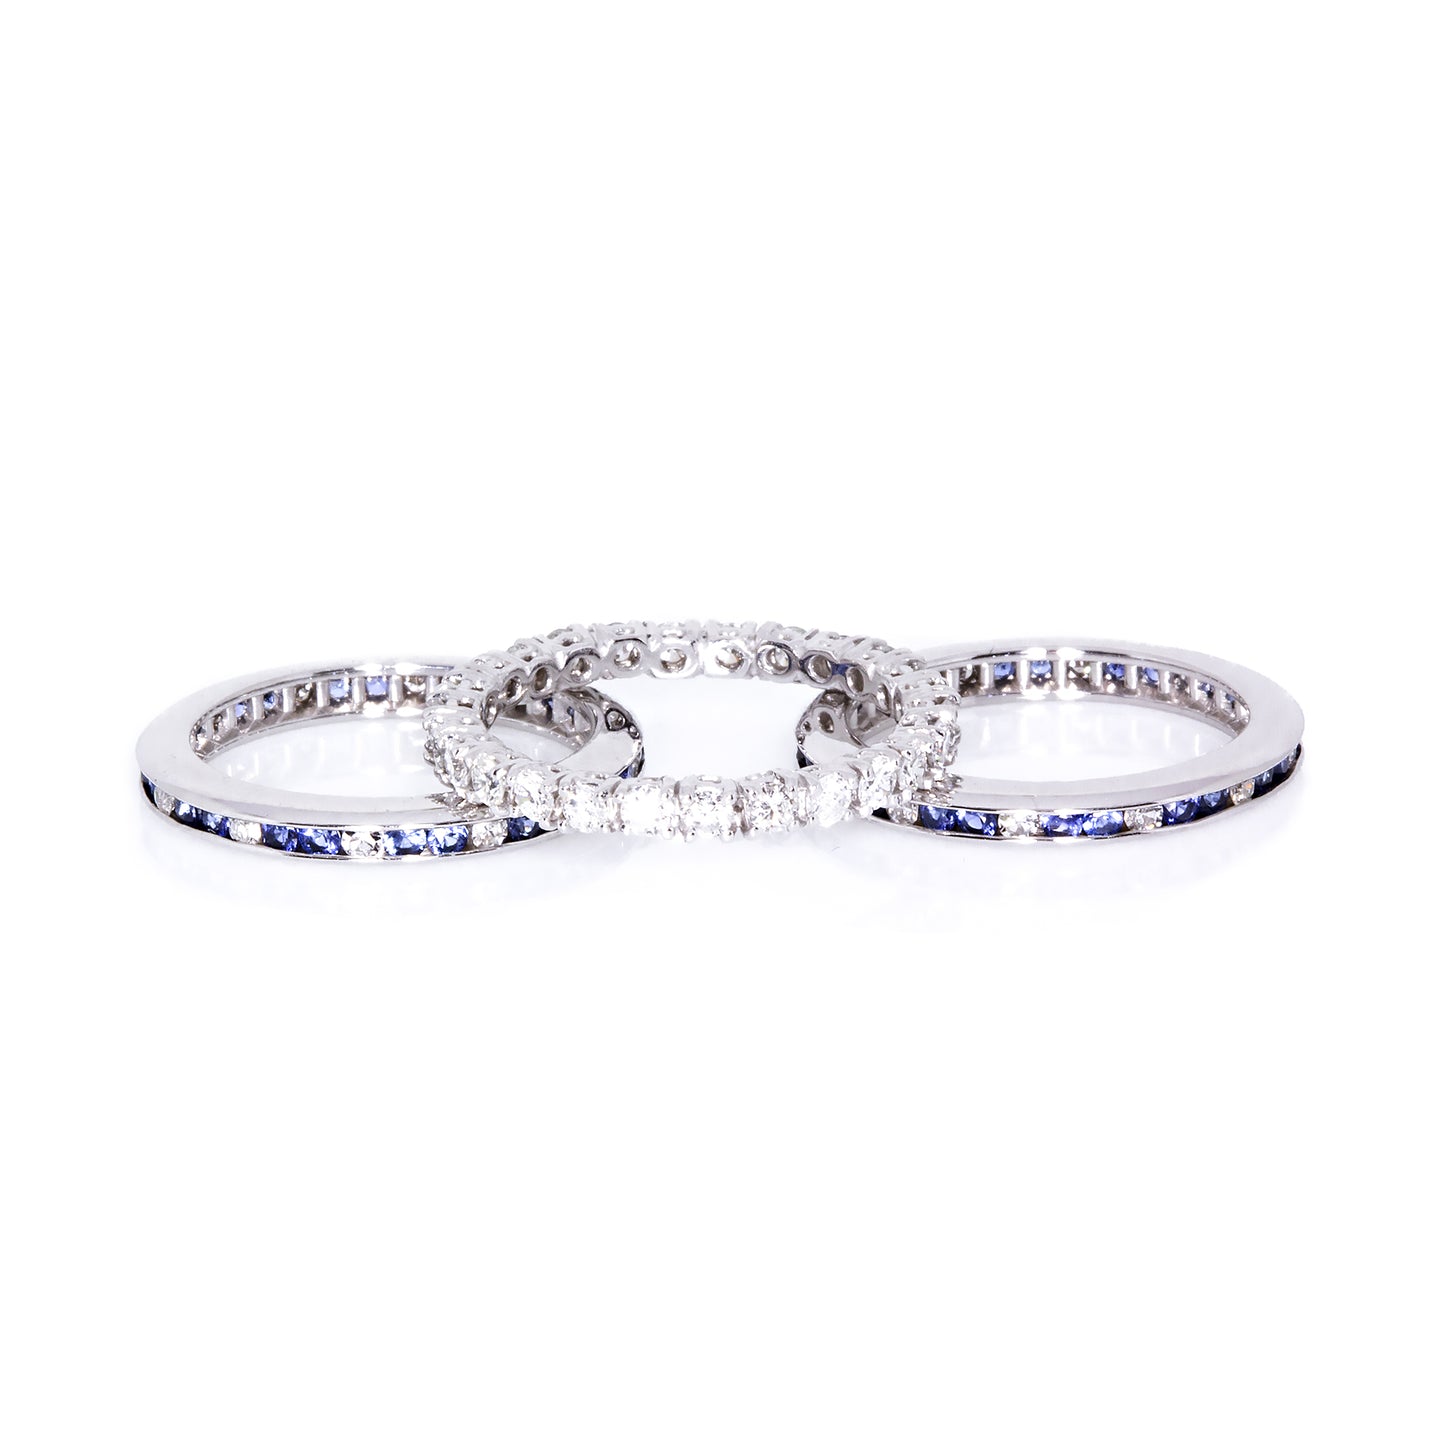 Eternity Bands - Diamonds and Other Gemstones